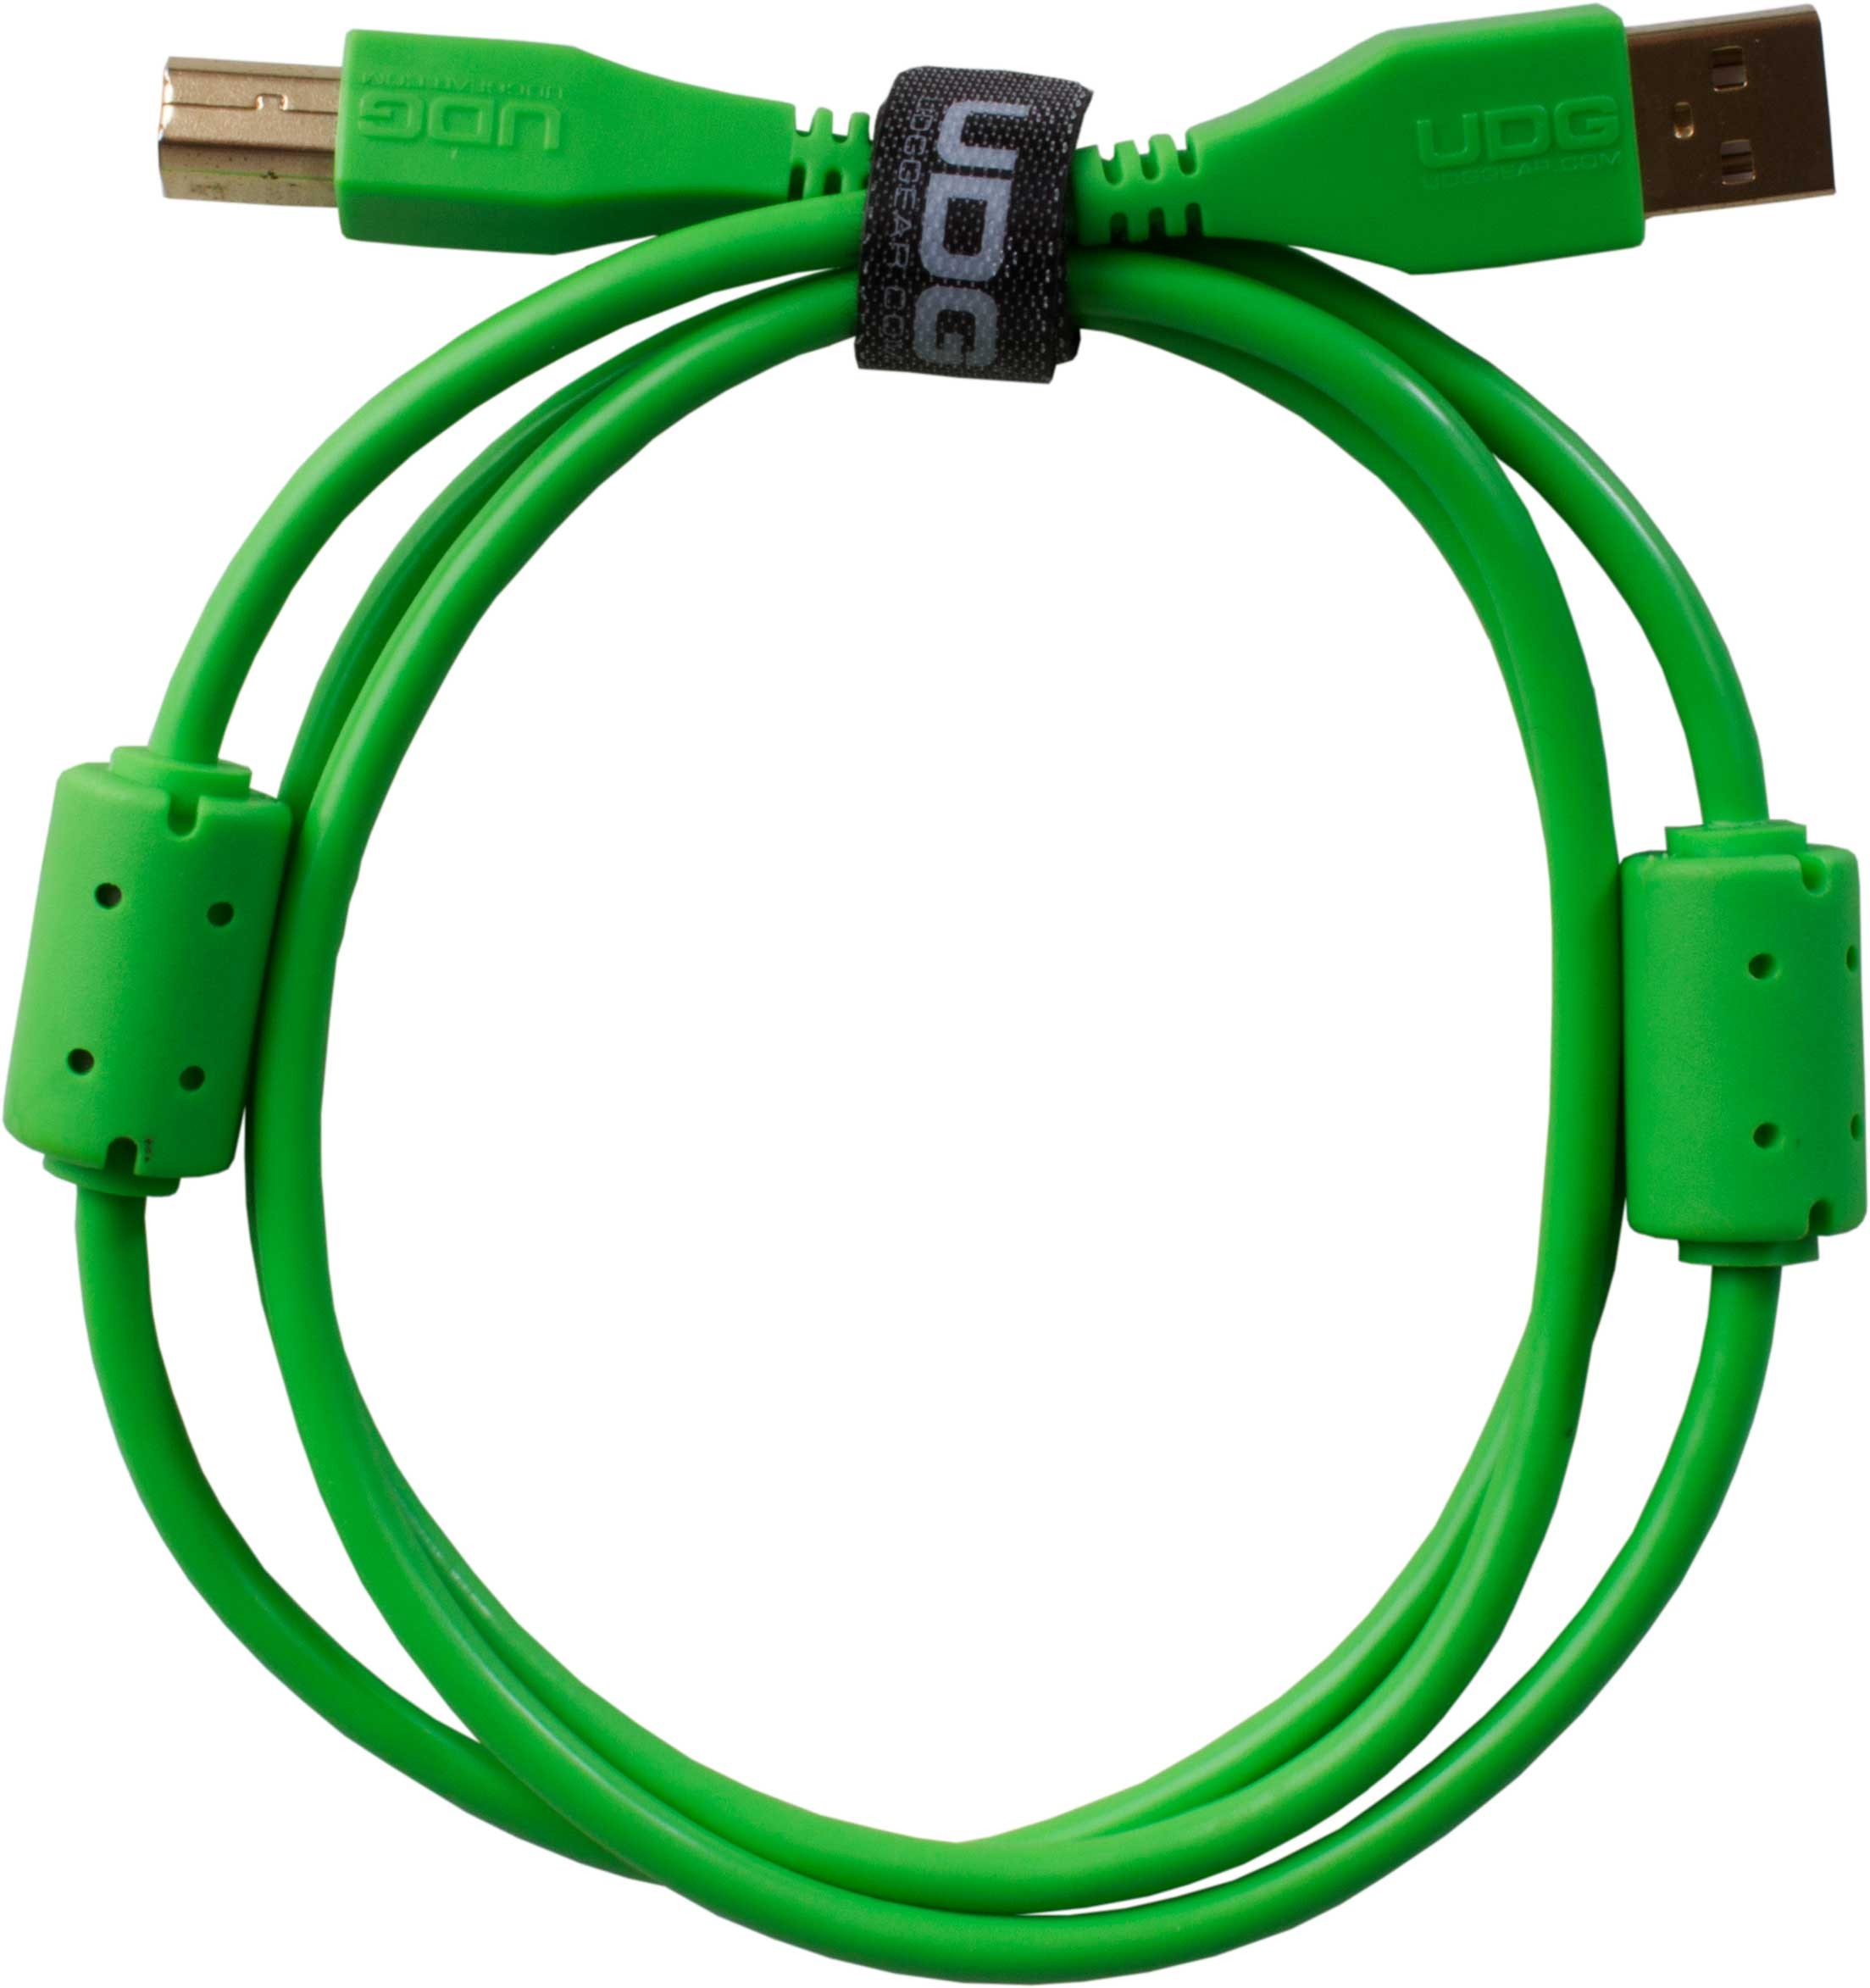 UDG U95001GR - ULTIMATE AUDIO CABLE USB 2.0 A-B GREEN STRAIGHT  1M